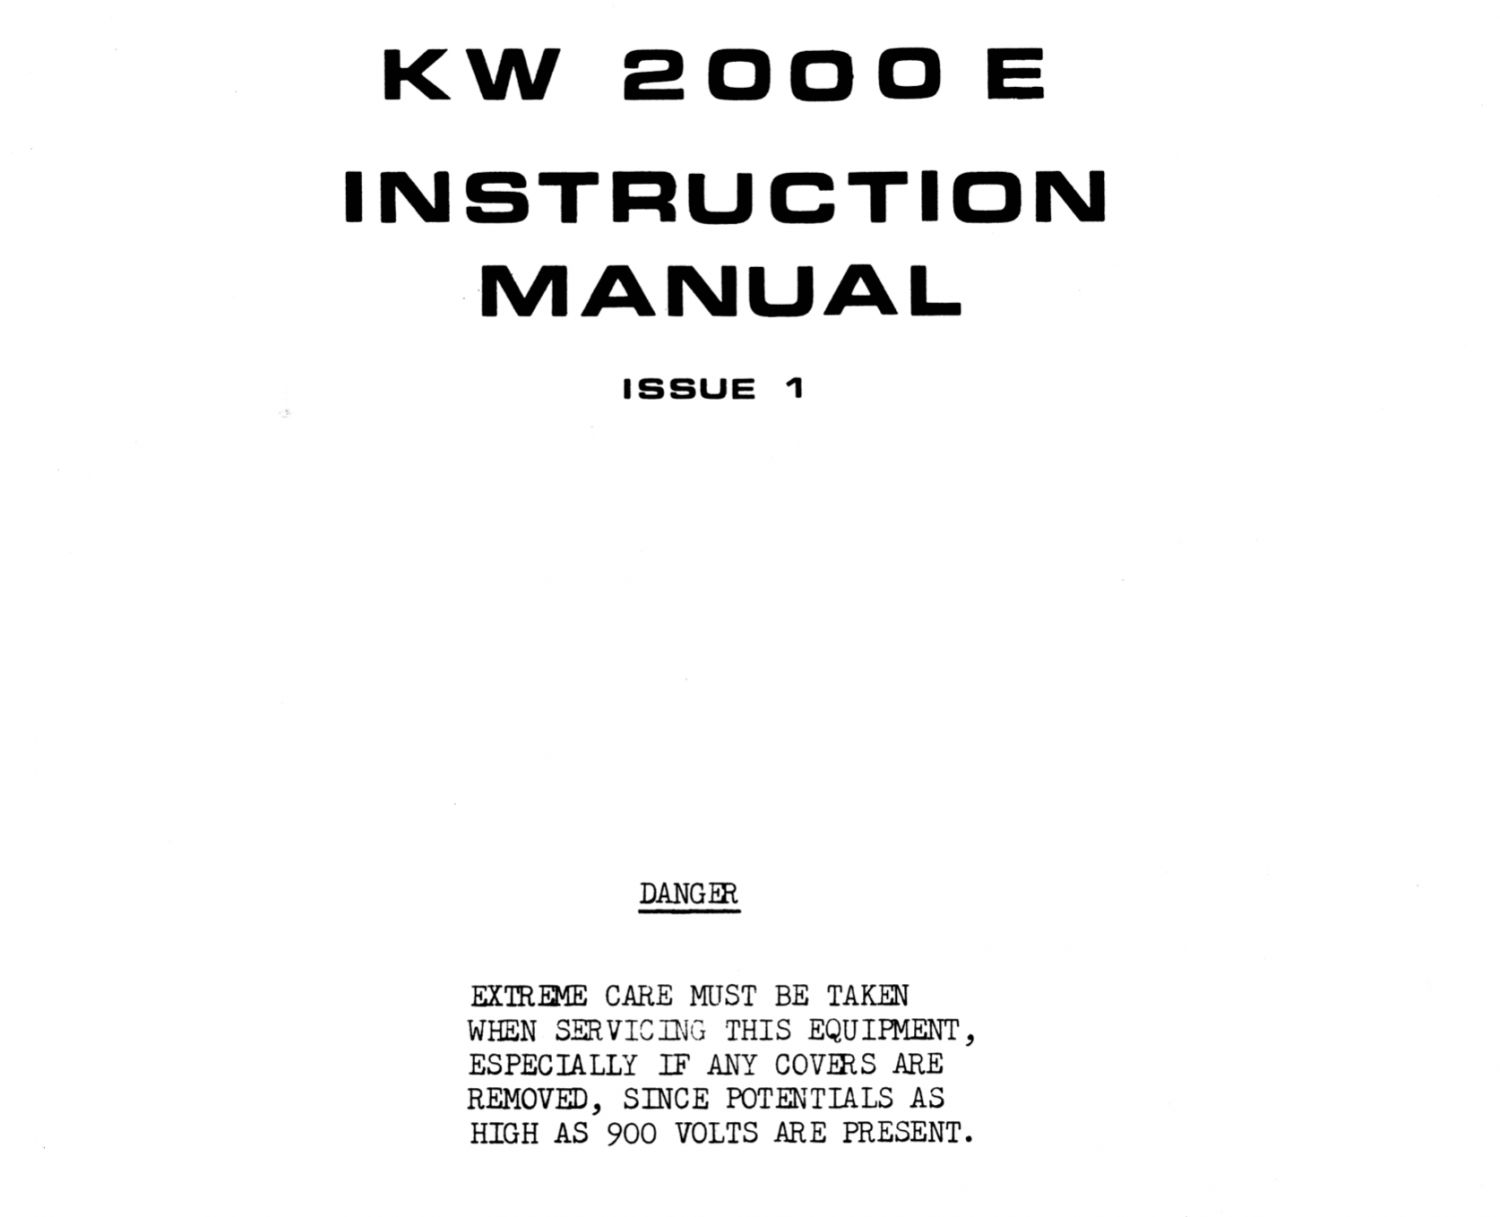 KW-2000E - Instruction Manual (Cleaned)